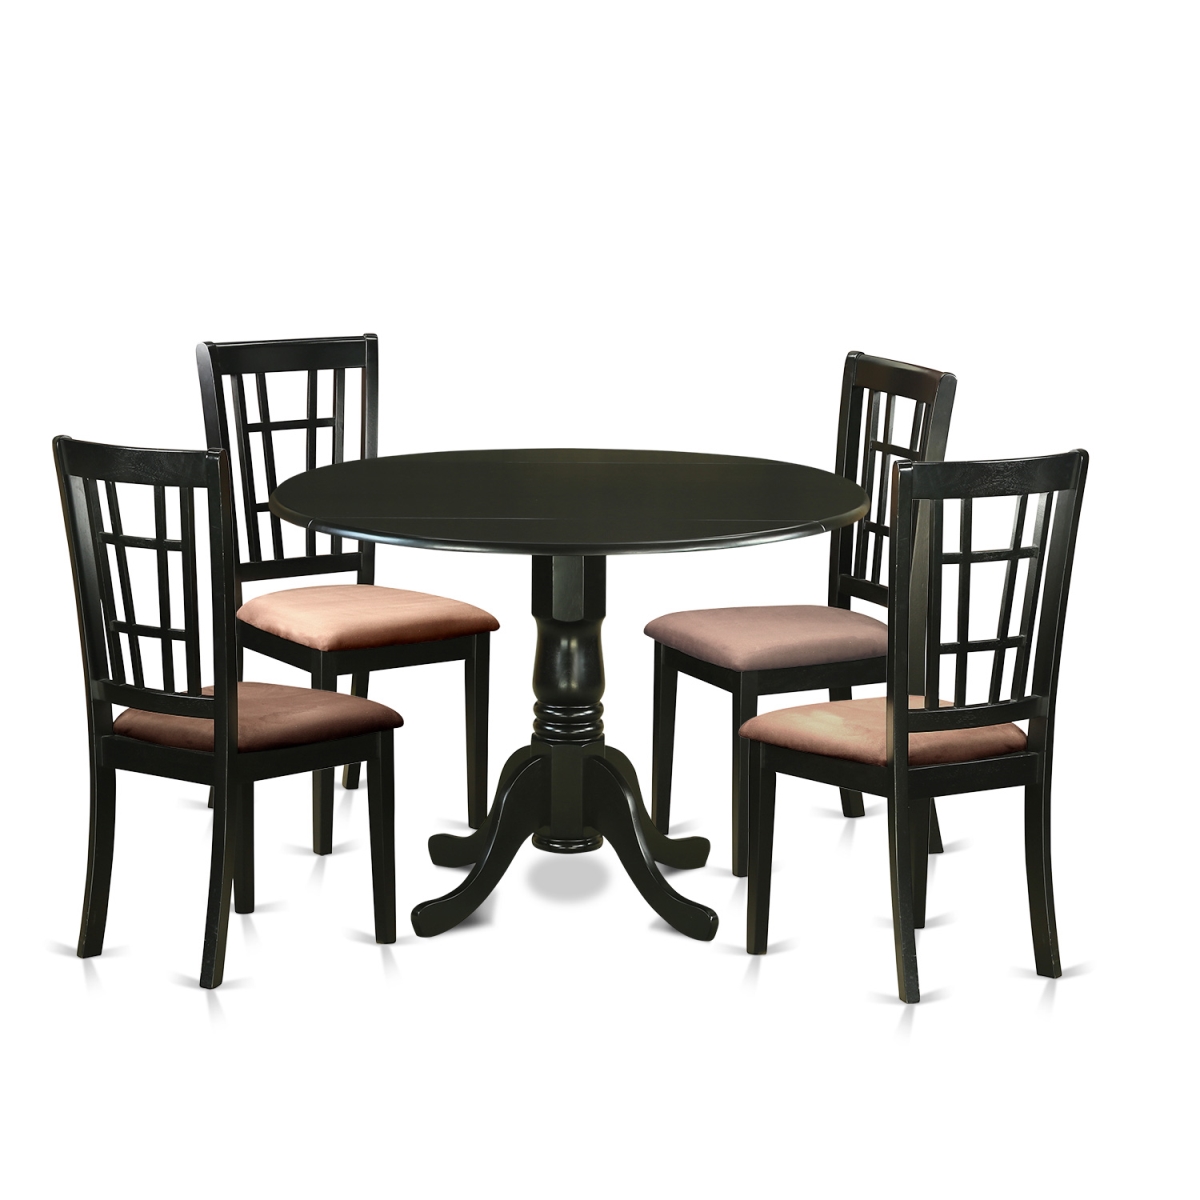 Picture of East West Furniture DLNI5-BLK-C Microfiber Dining Room Set with 4 Table & 4 Chairs, Black - 5 Piece